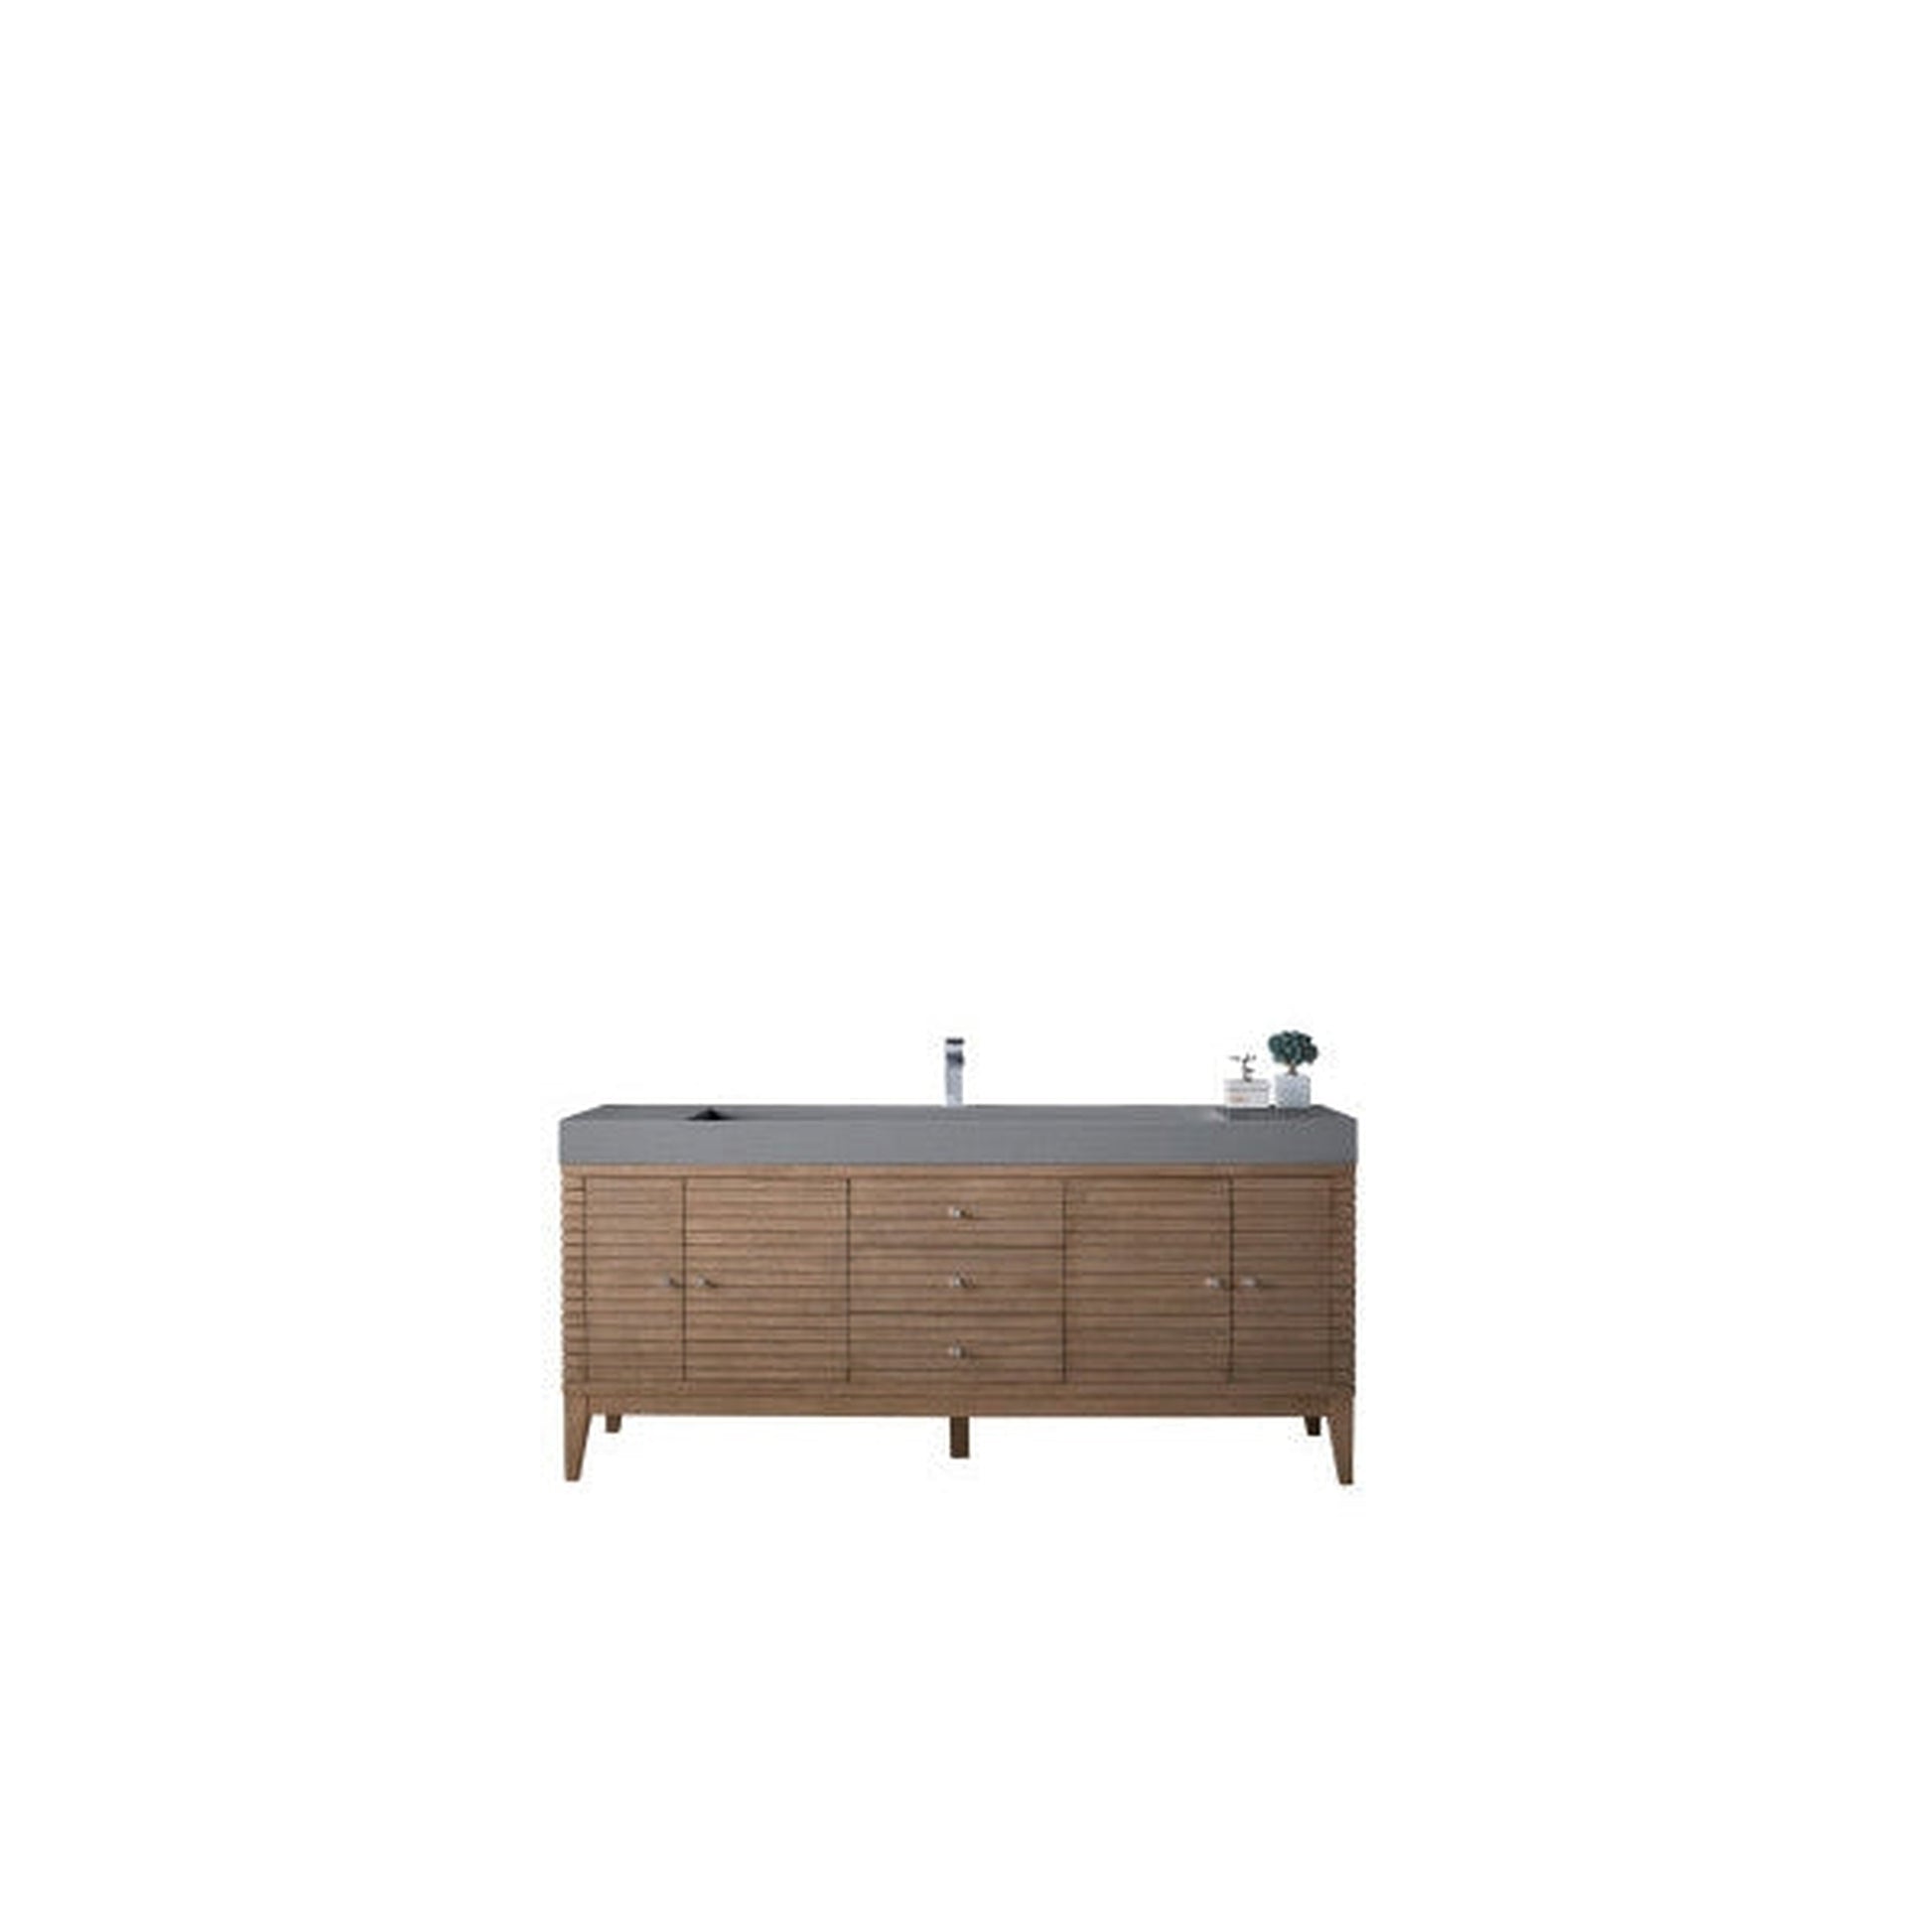 James Martin Linear 73" Single Whitewashed Walnut Bathroom Vanity With 6" Glossy Dusk Gray Composite Countertop